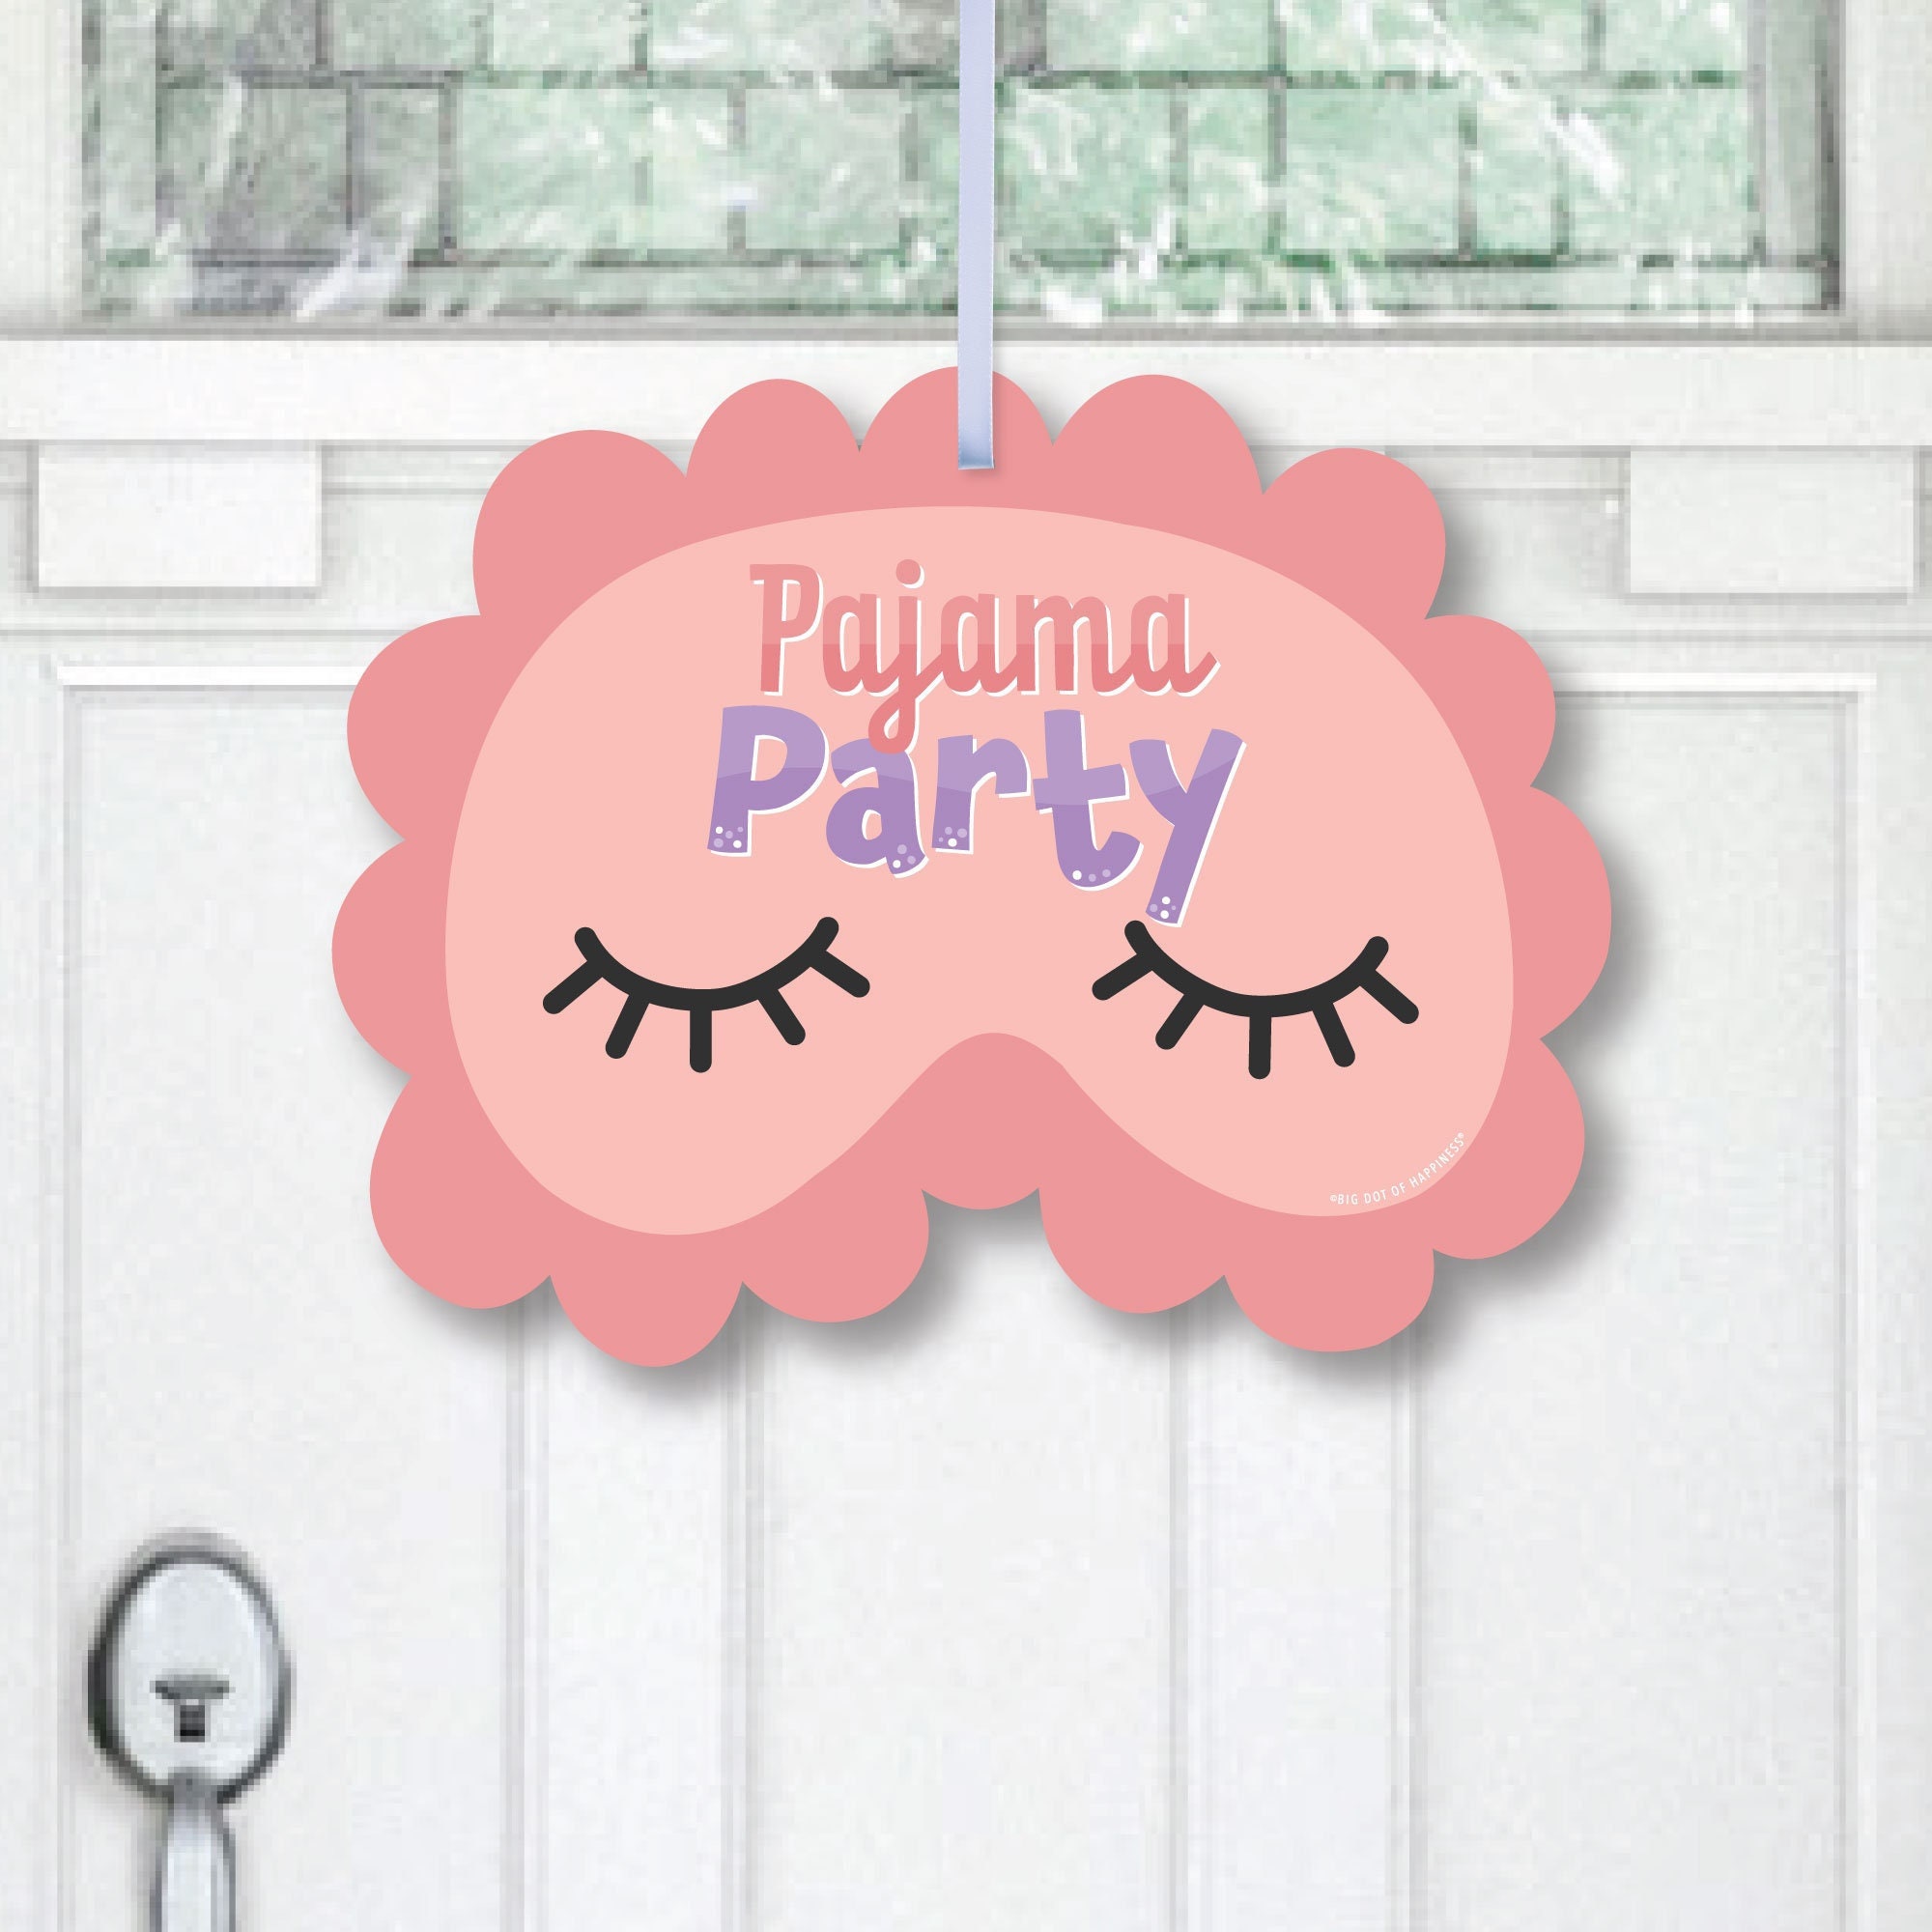 Pajama Party Balloons Banner Rose Gold Sleepover Pajama Party Decorations  Slumber Theme Birthday Party Supplies for Girls